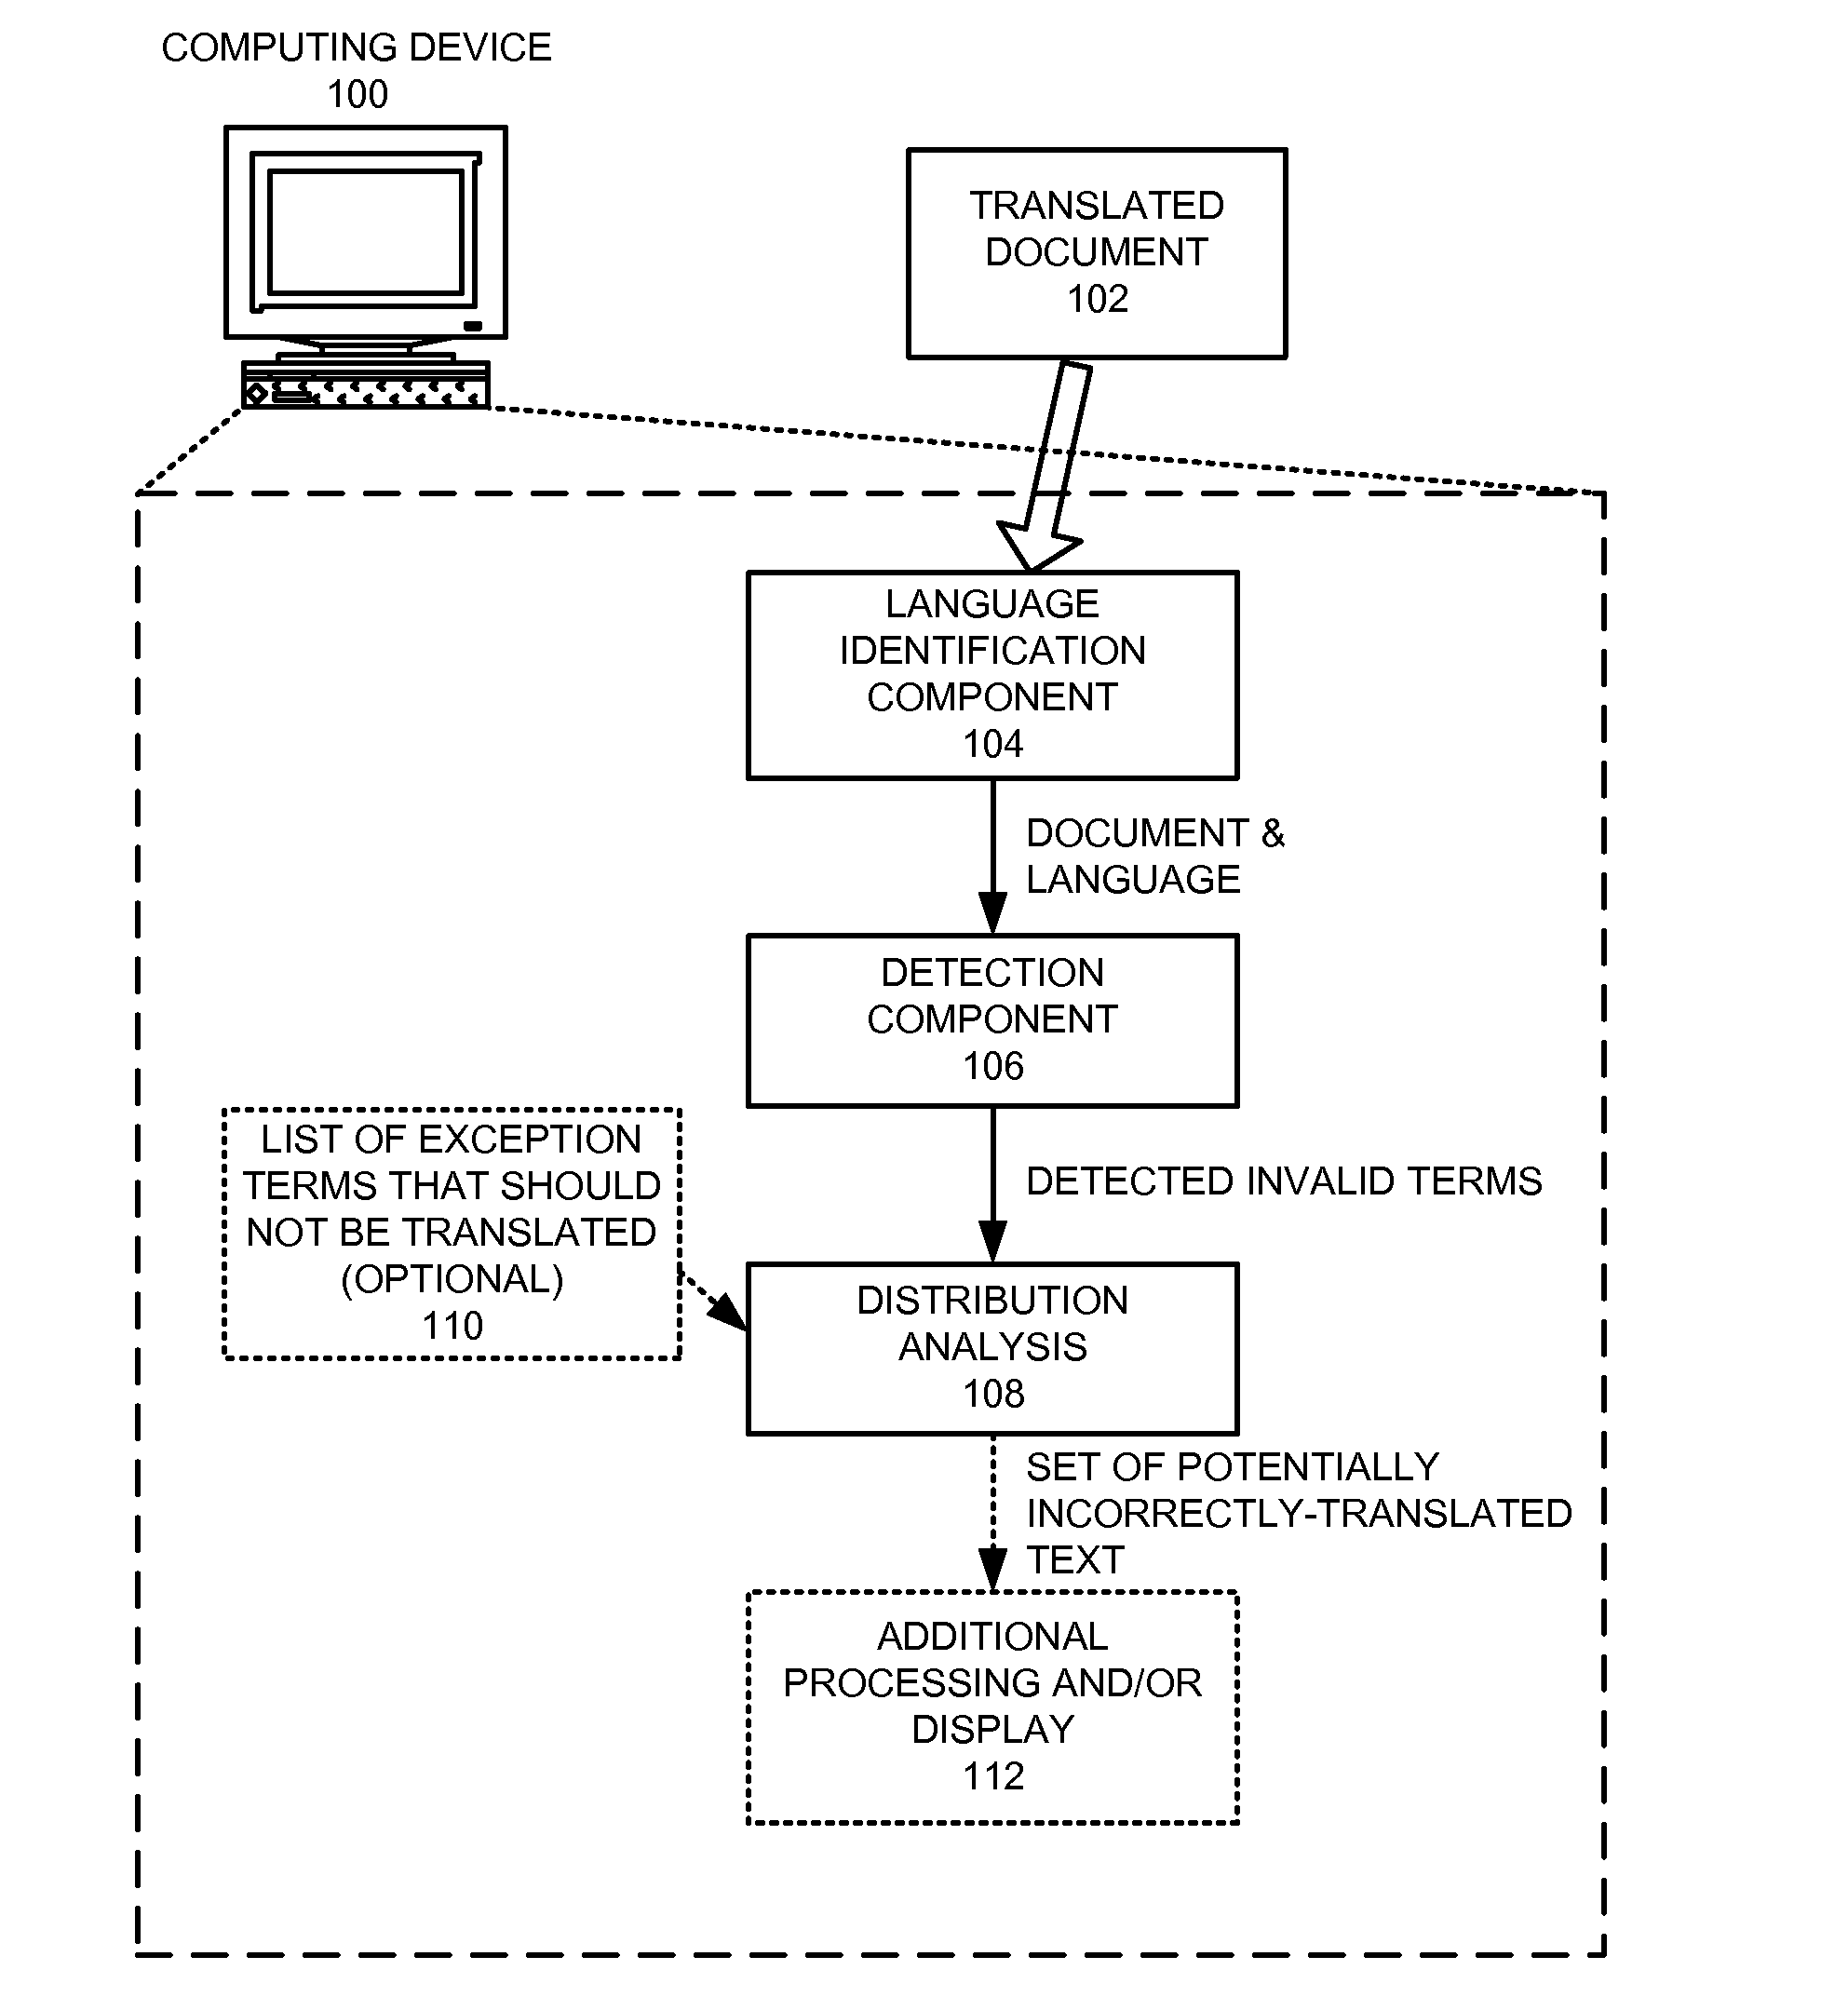 Method and apparatus for detecting incorrectly translated text in a document